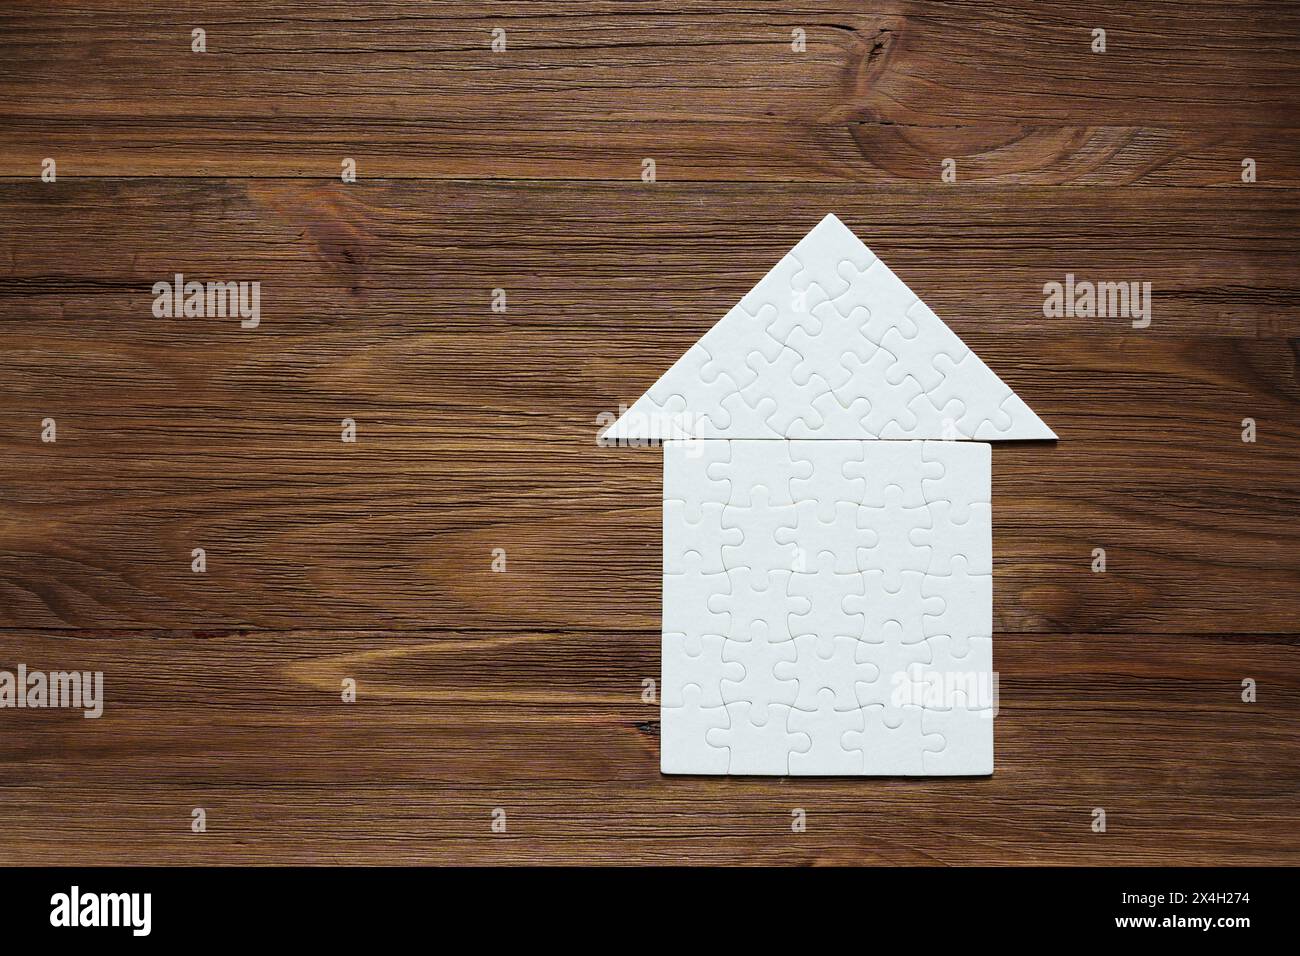 Jigsaw puzzle in the shape of a house with a roof, set against a dark wooden backdrop. Home and family concept. Stock Photo